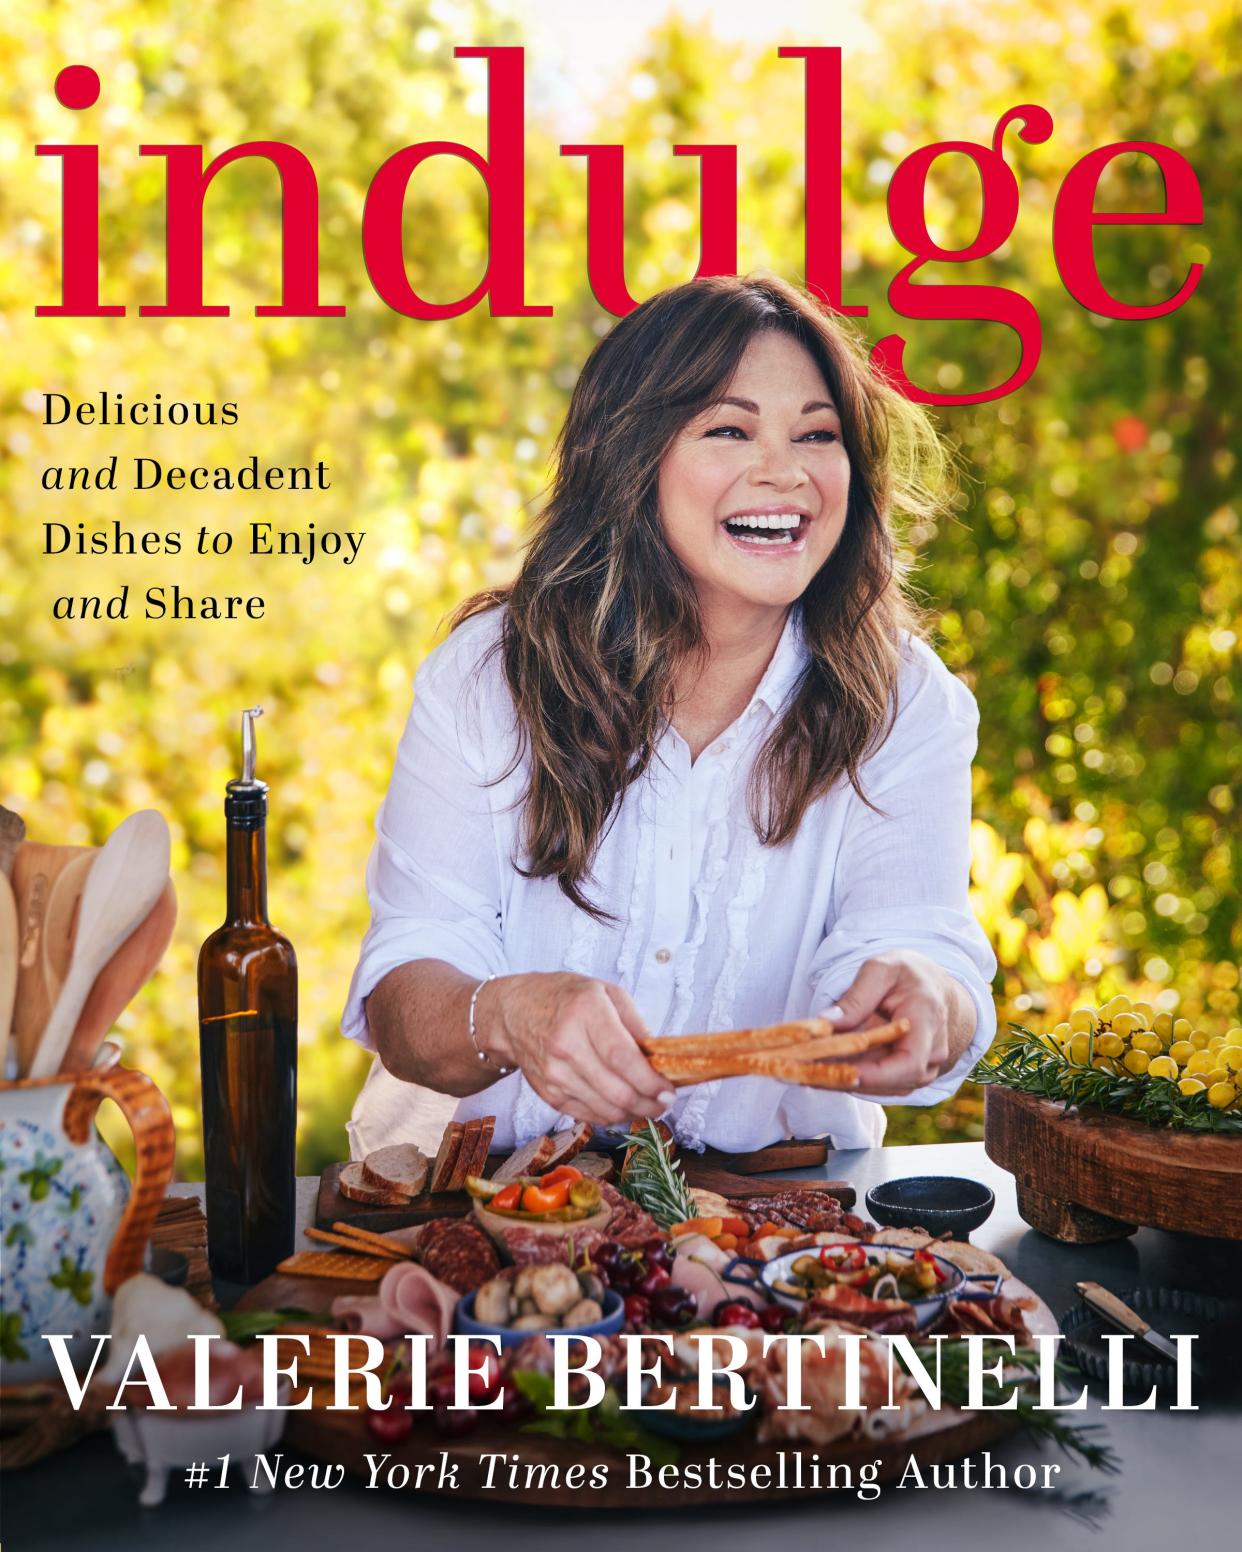 Valerie Bertinelli's new cookbook, "Indulge," is out April 2.